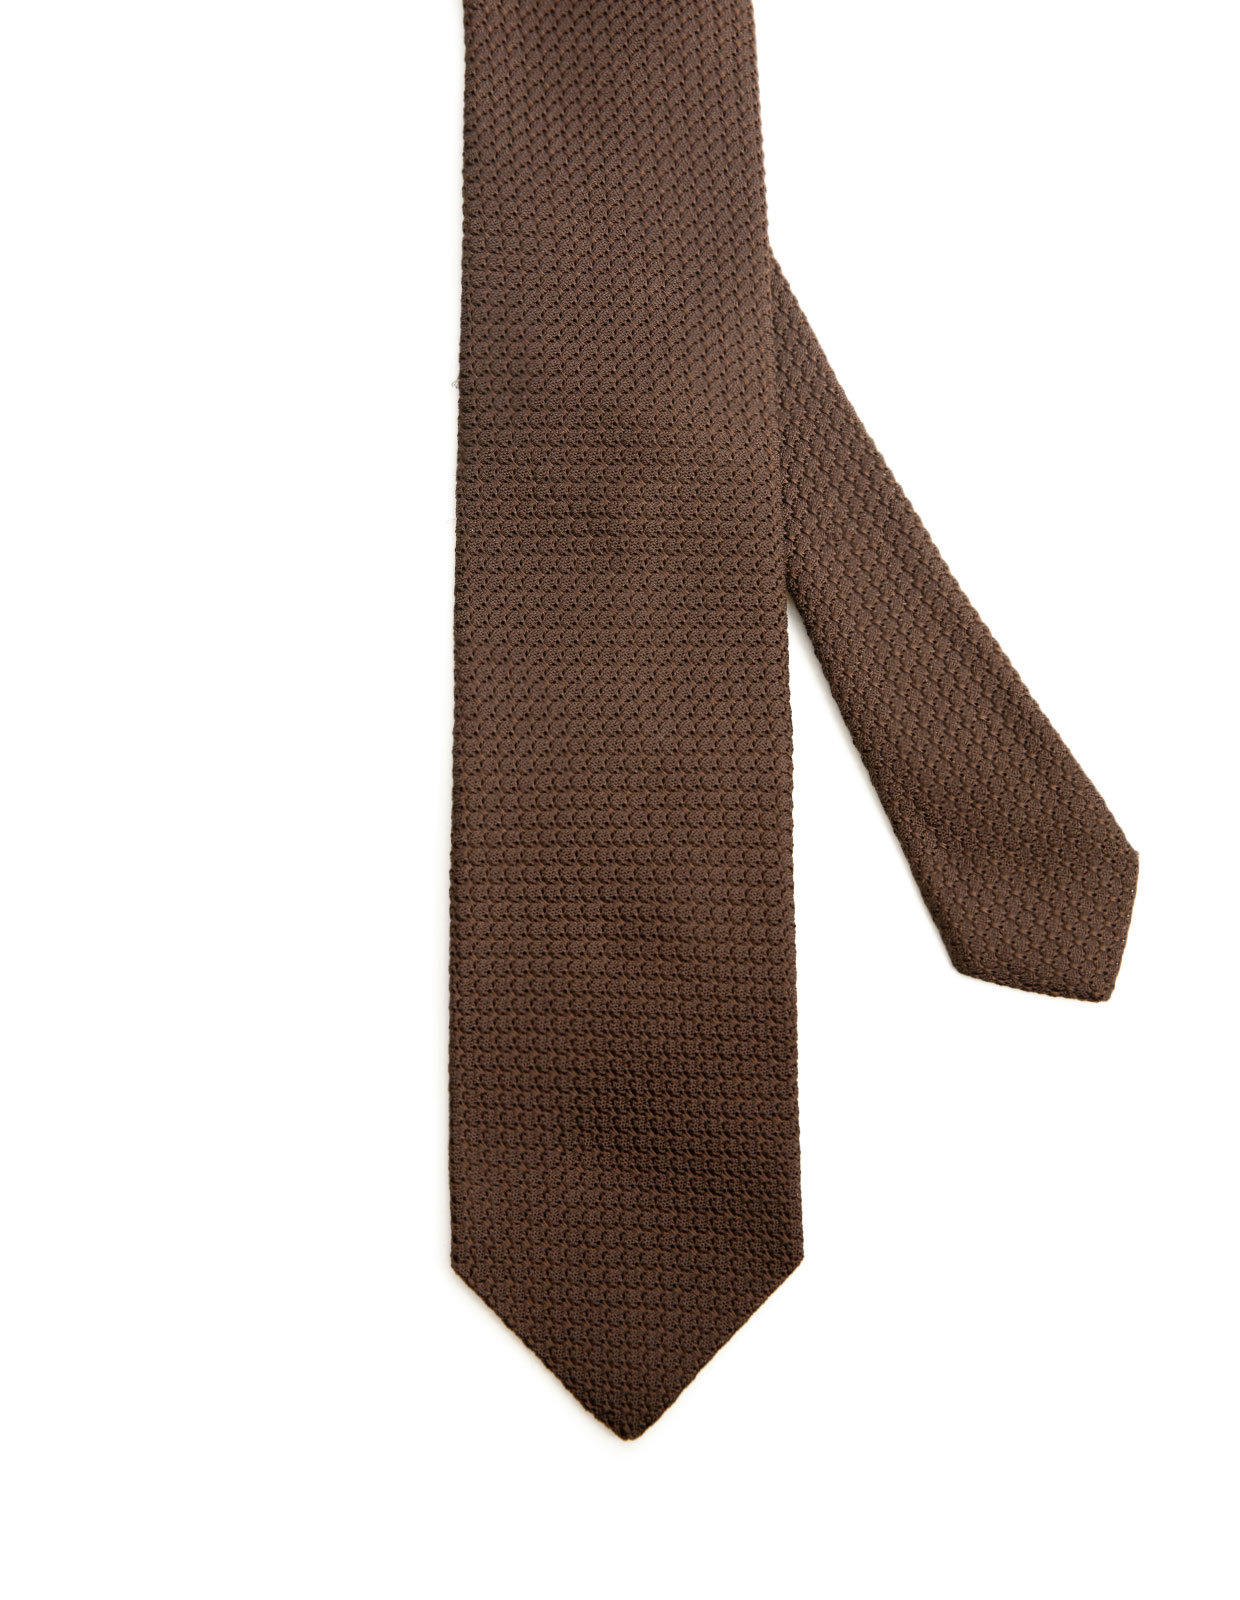 Grenadine Tie Lined Large Knot Brown